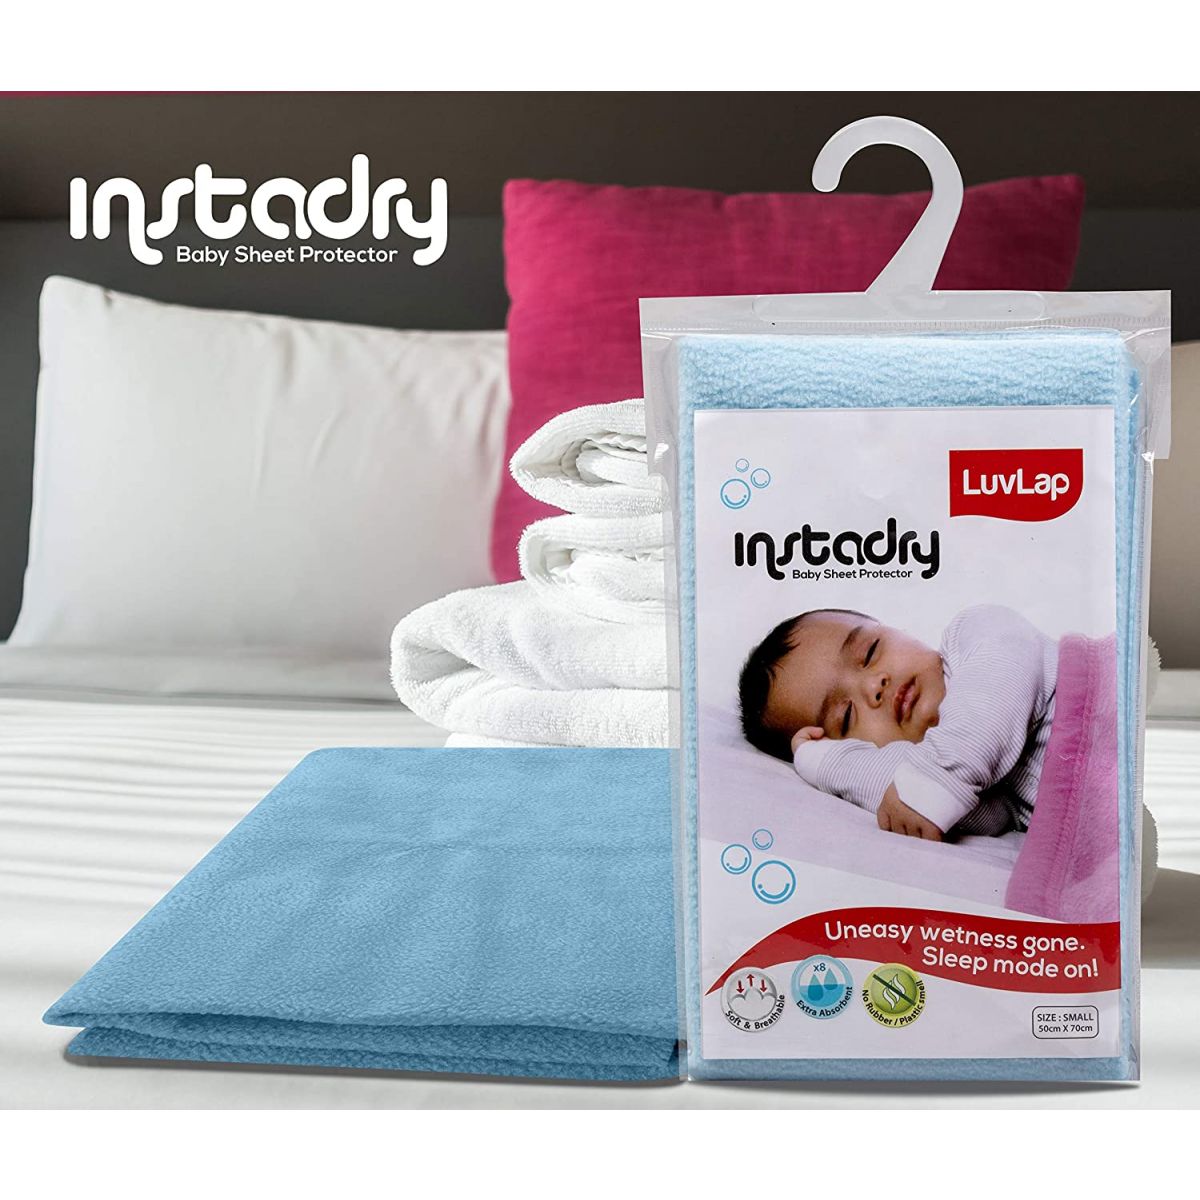 Luvlap Instadry Extra Absorbent Dry Sheet / Bed Protector - Sky Blue